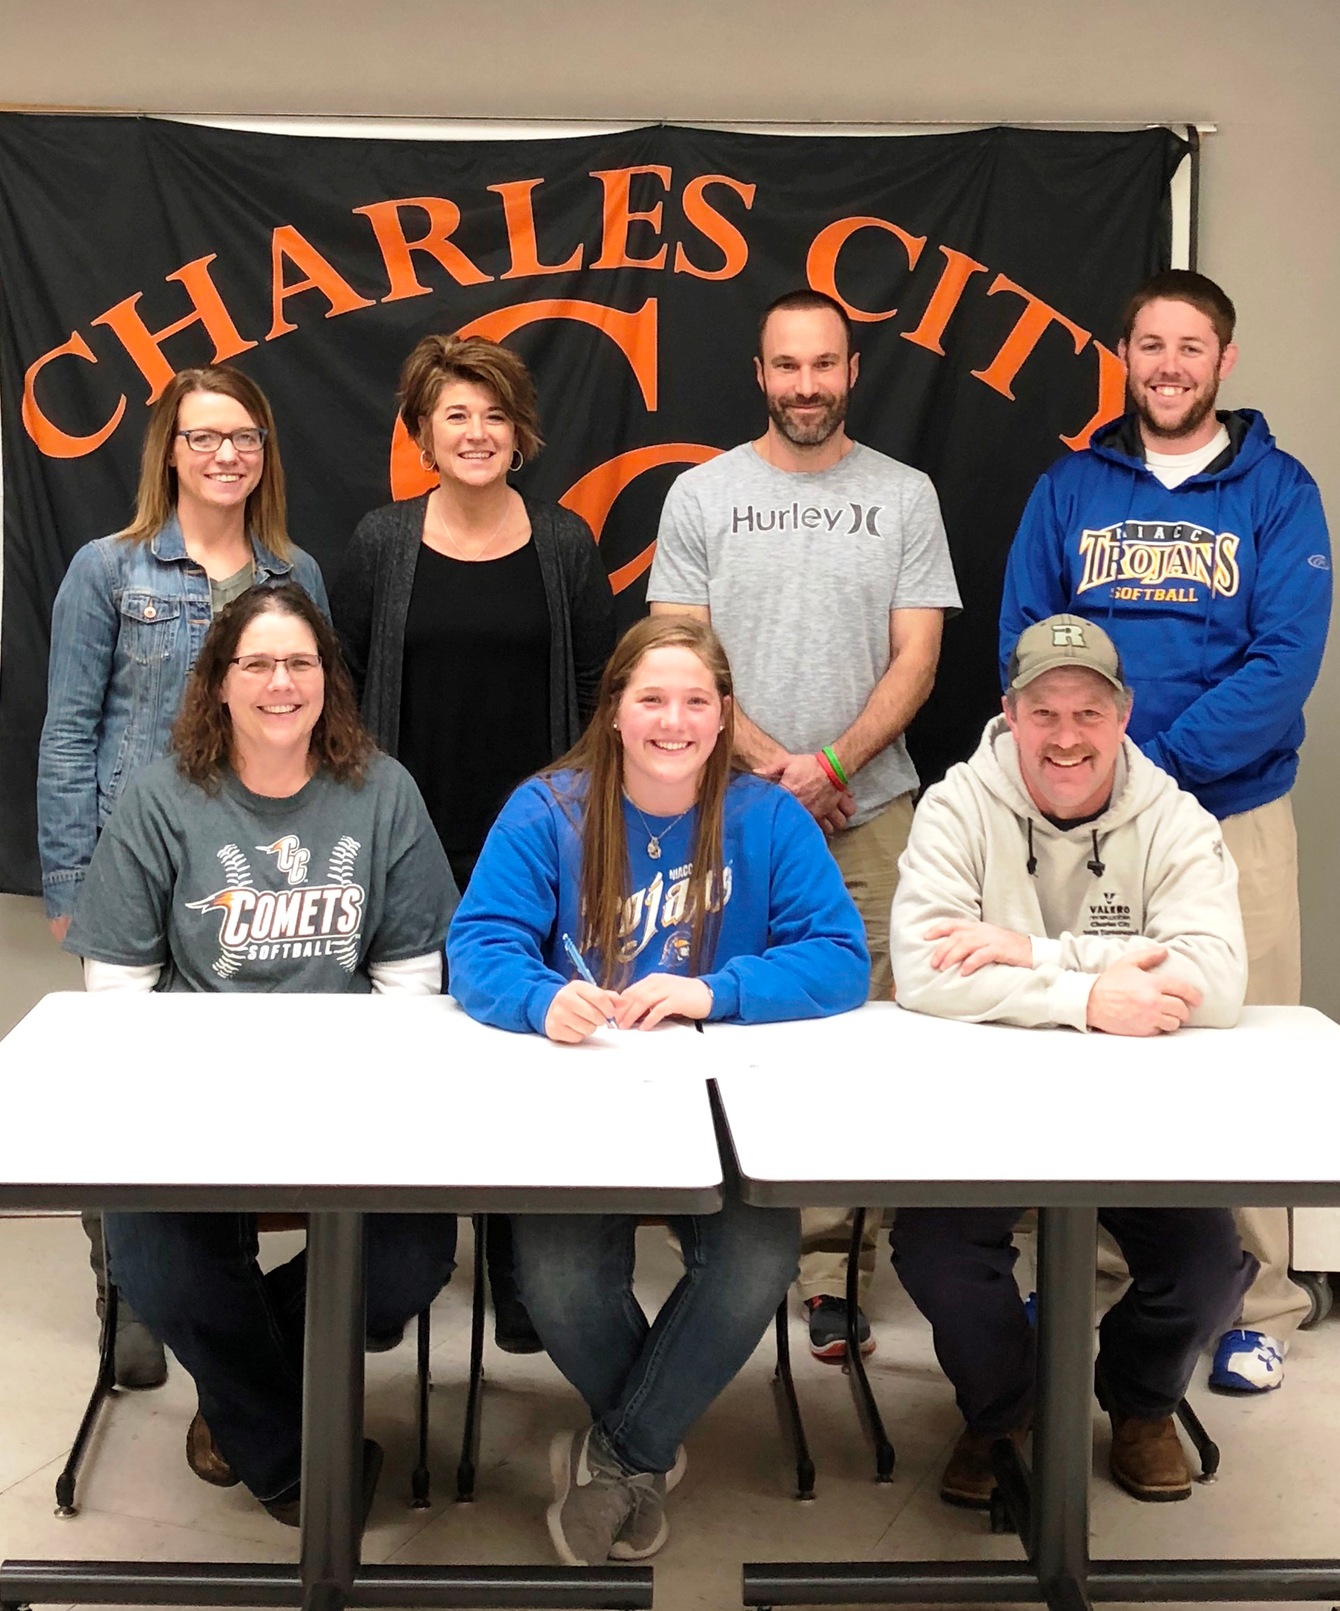 Charles City's Ciana Sonberg signed a national letter of intent Monday to play softball next season at NIACC.